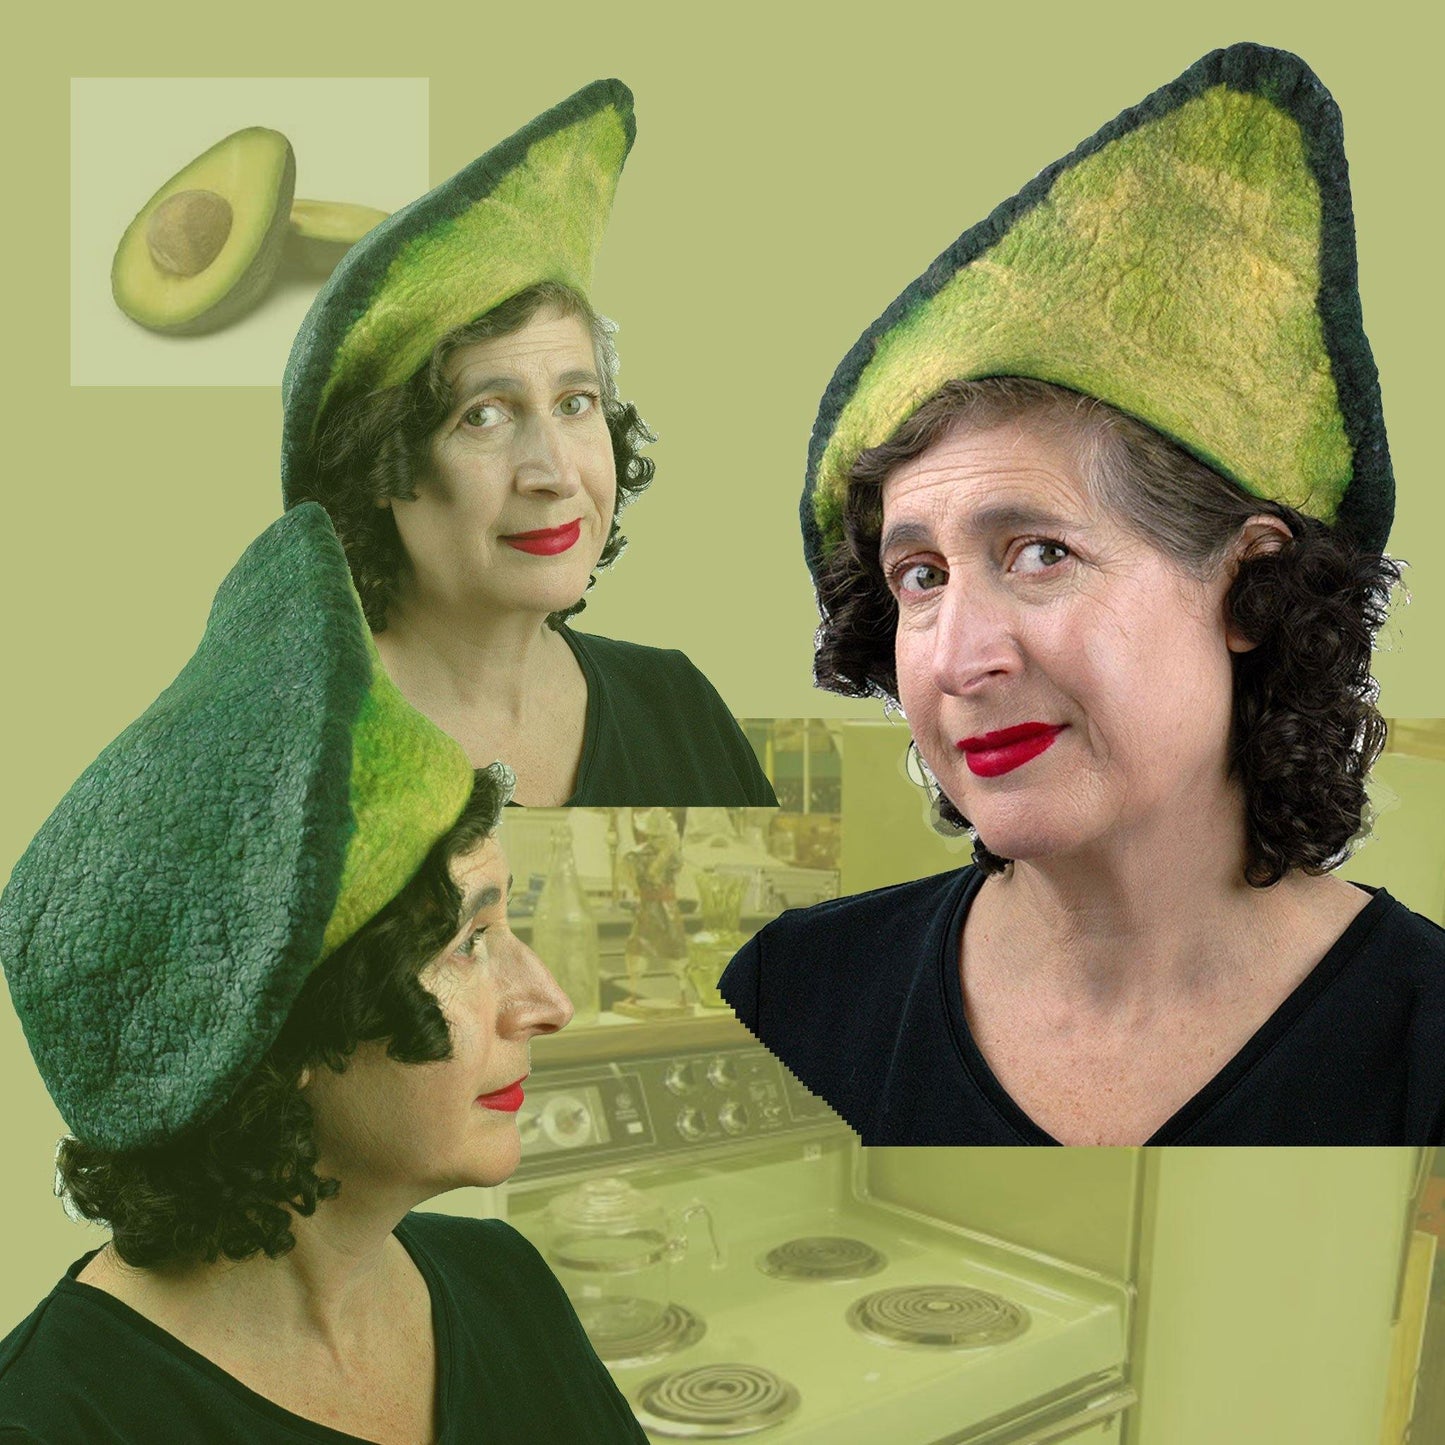 Felted Avocade Beret with retro kitchen collage and sliced avocado.